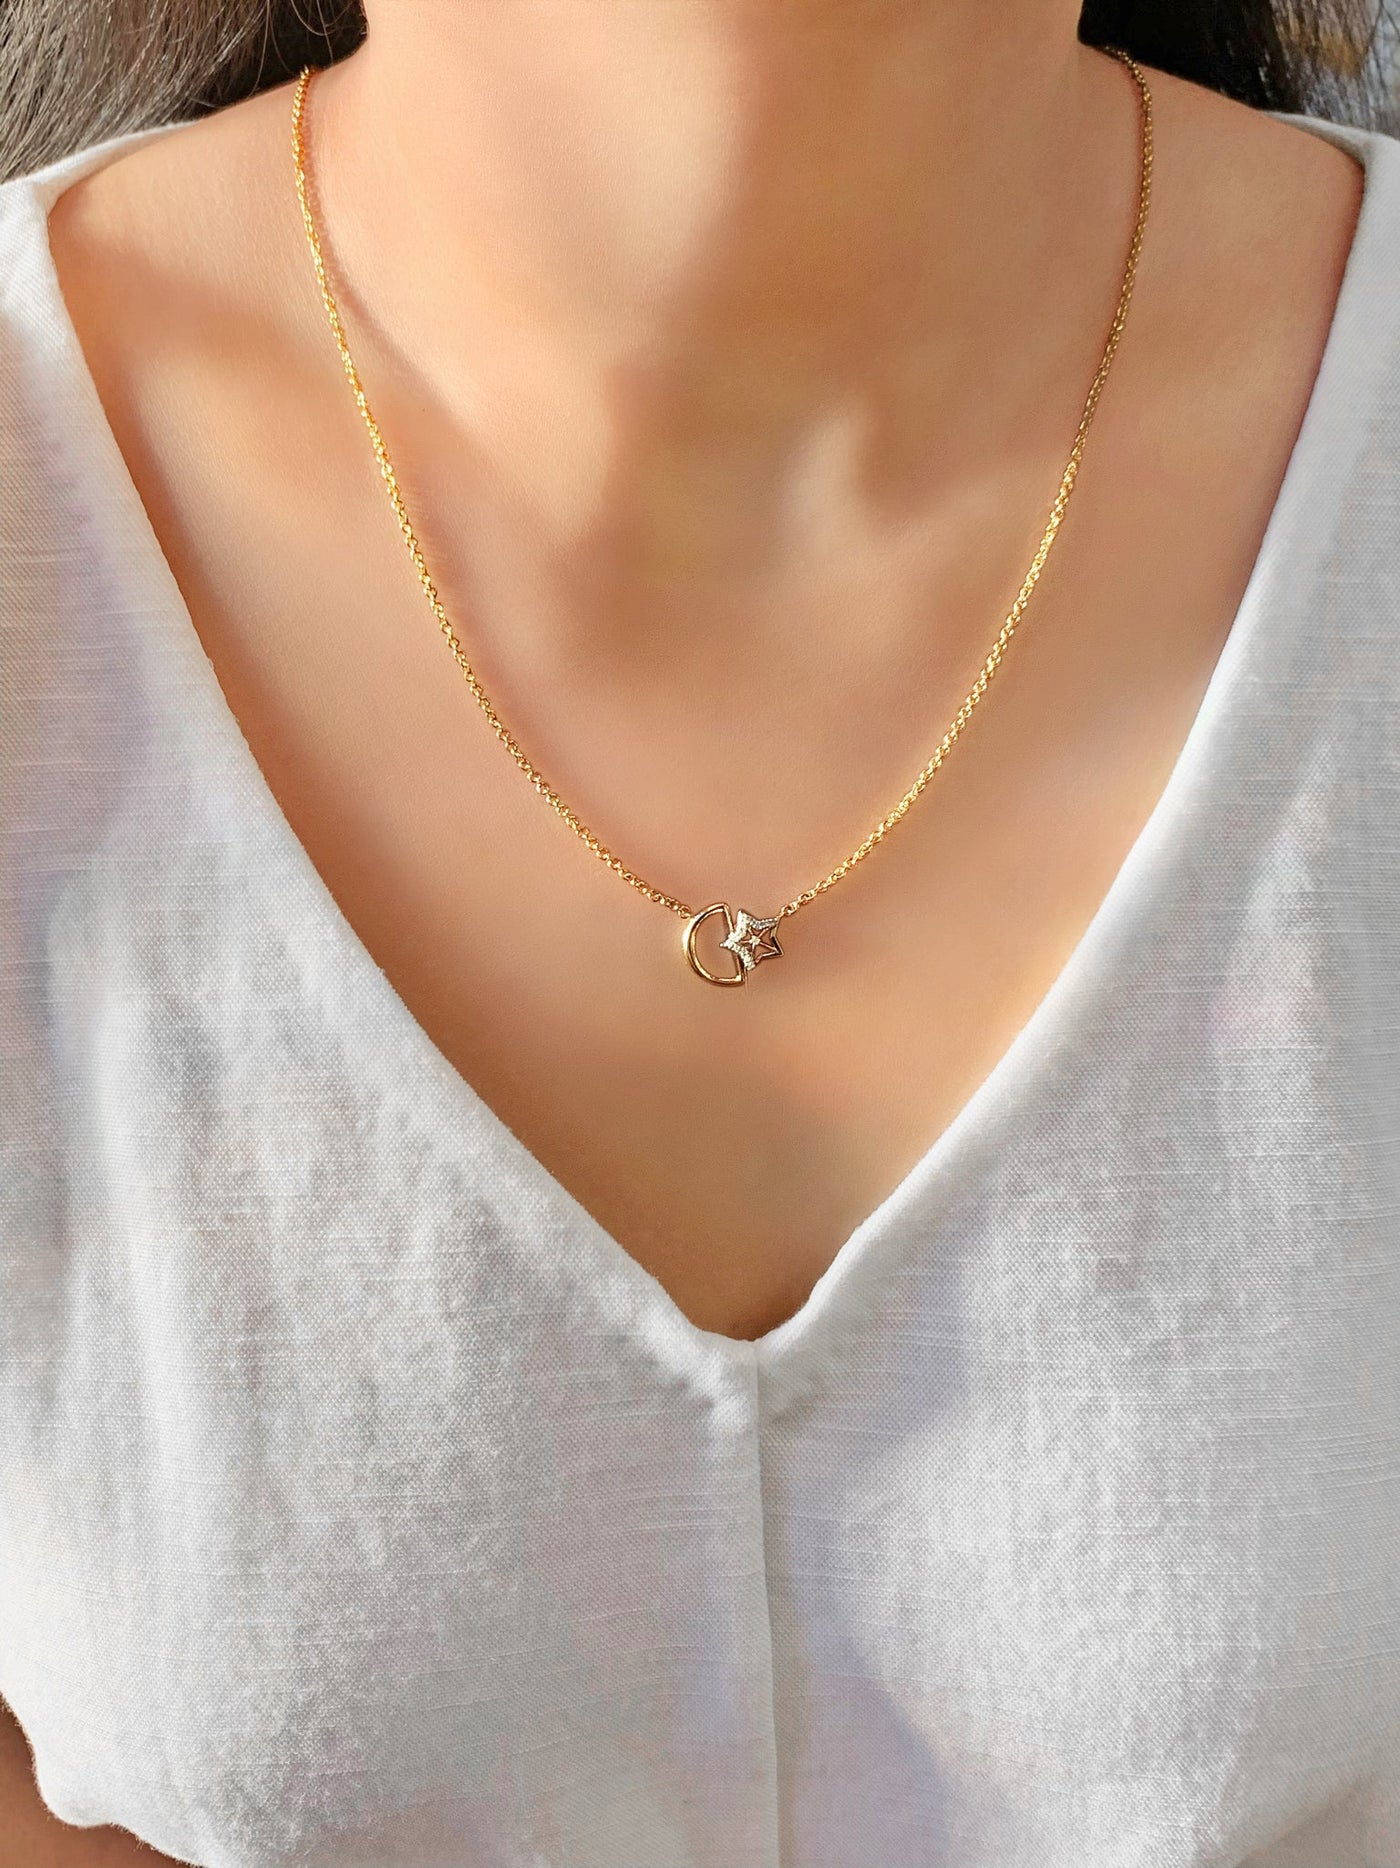 Necklace - Star-Kissed Moon - 14k gold plated - Diamonds